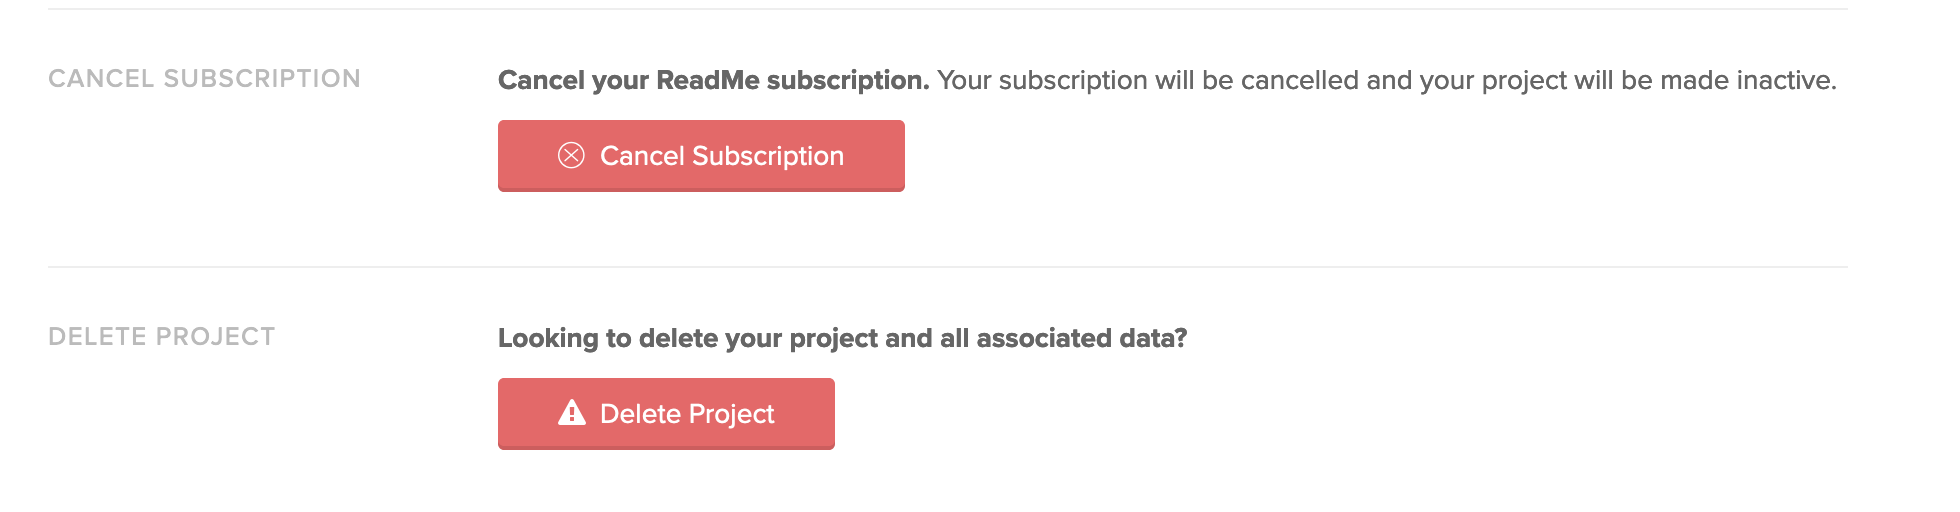 Cancel Subscription to stop paying and revert your project to a trial.